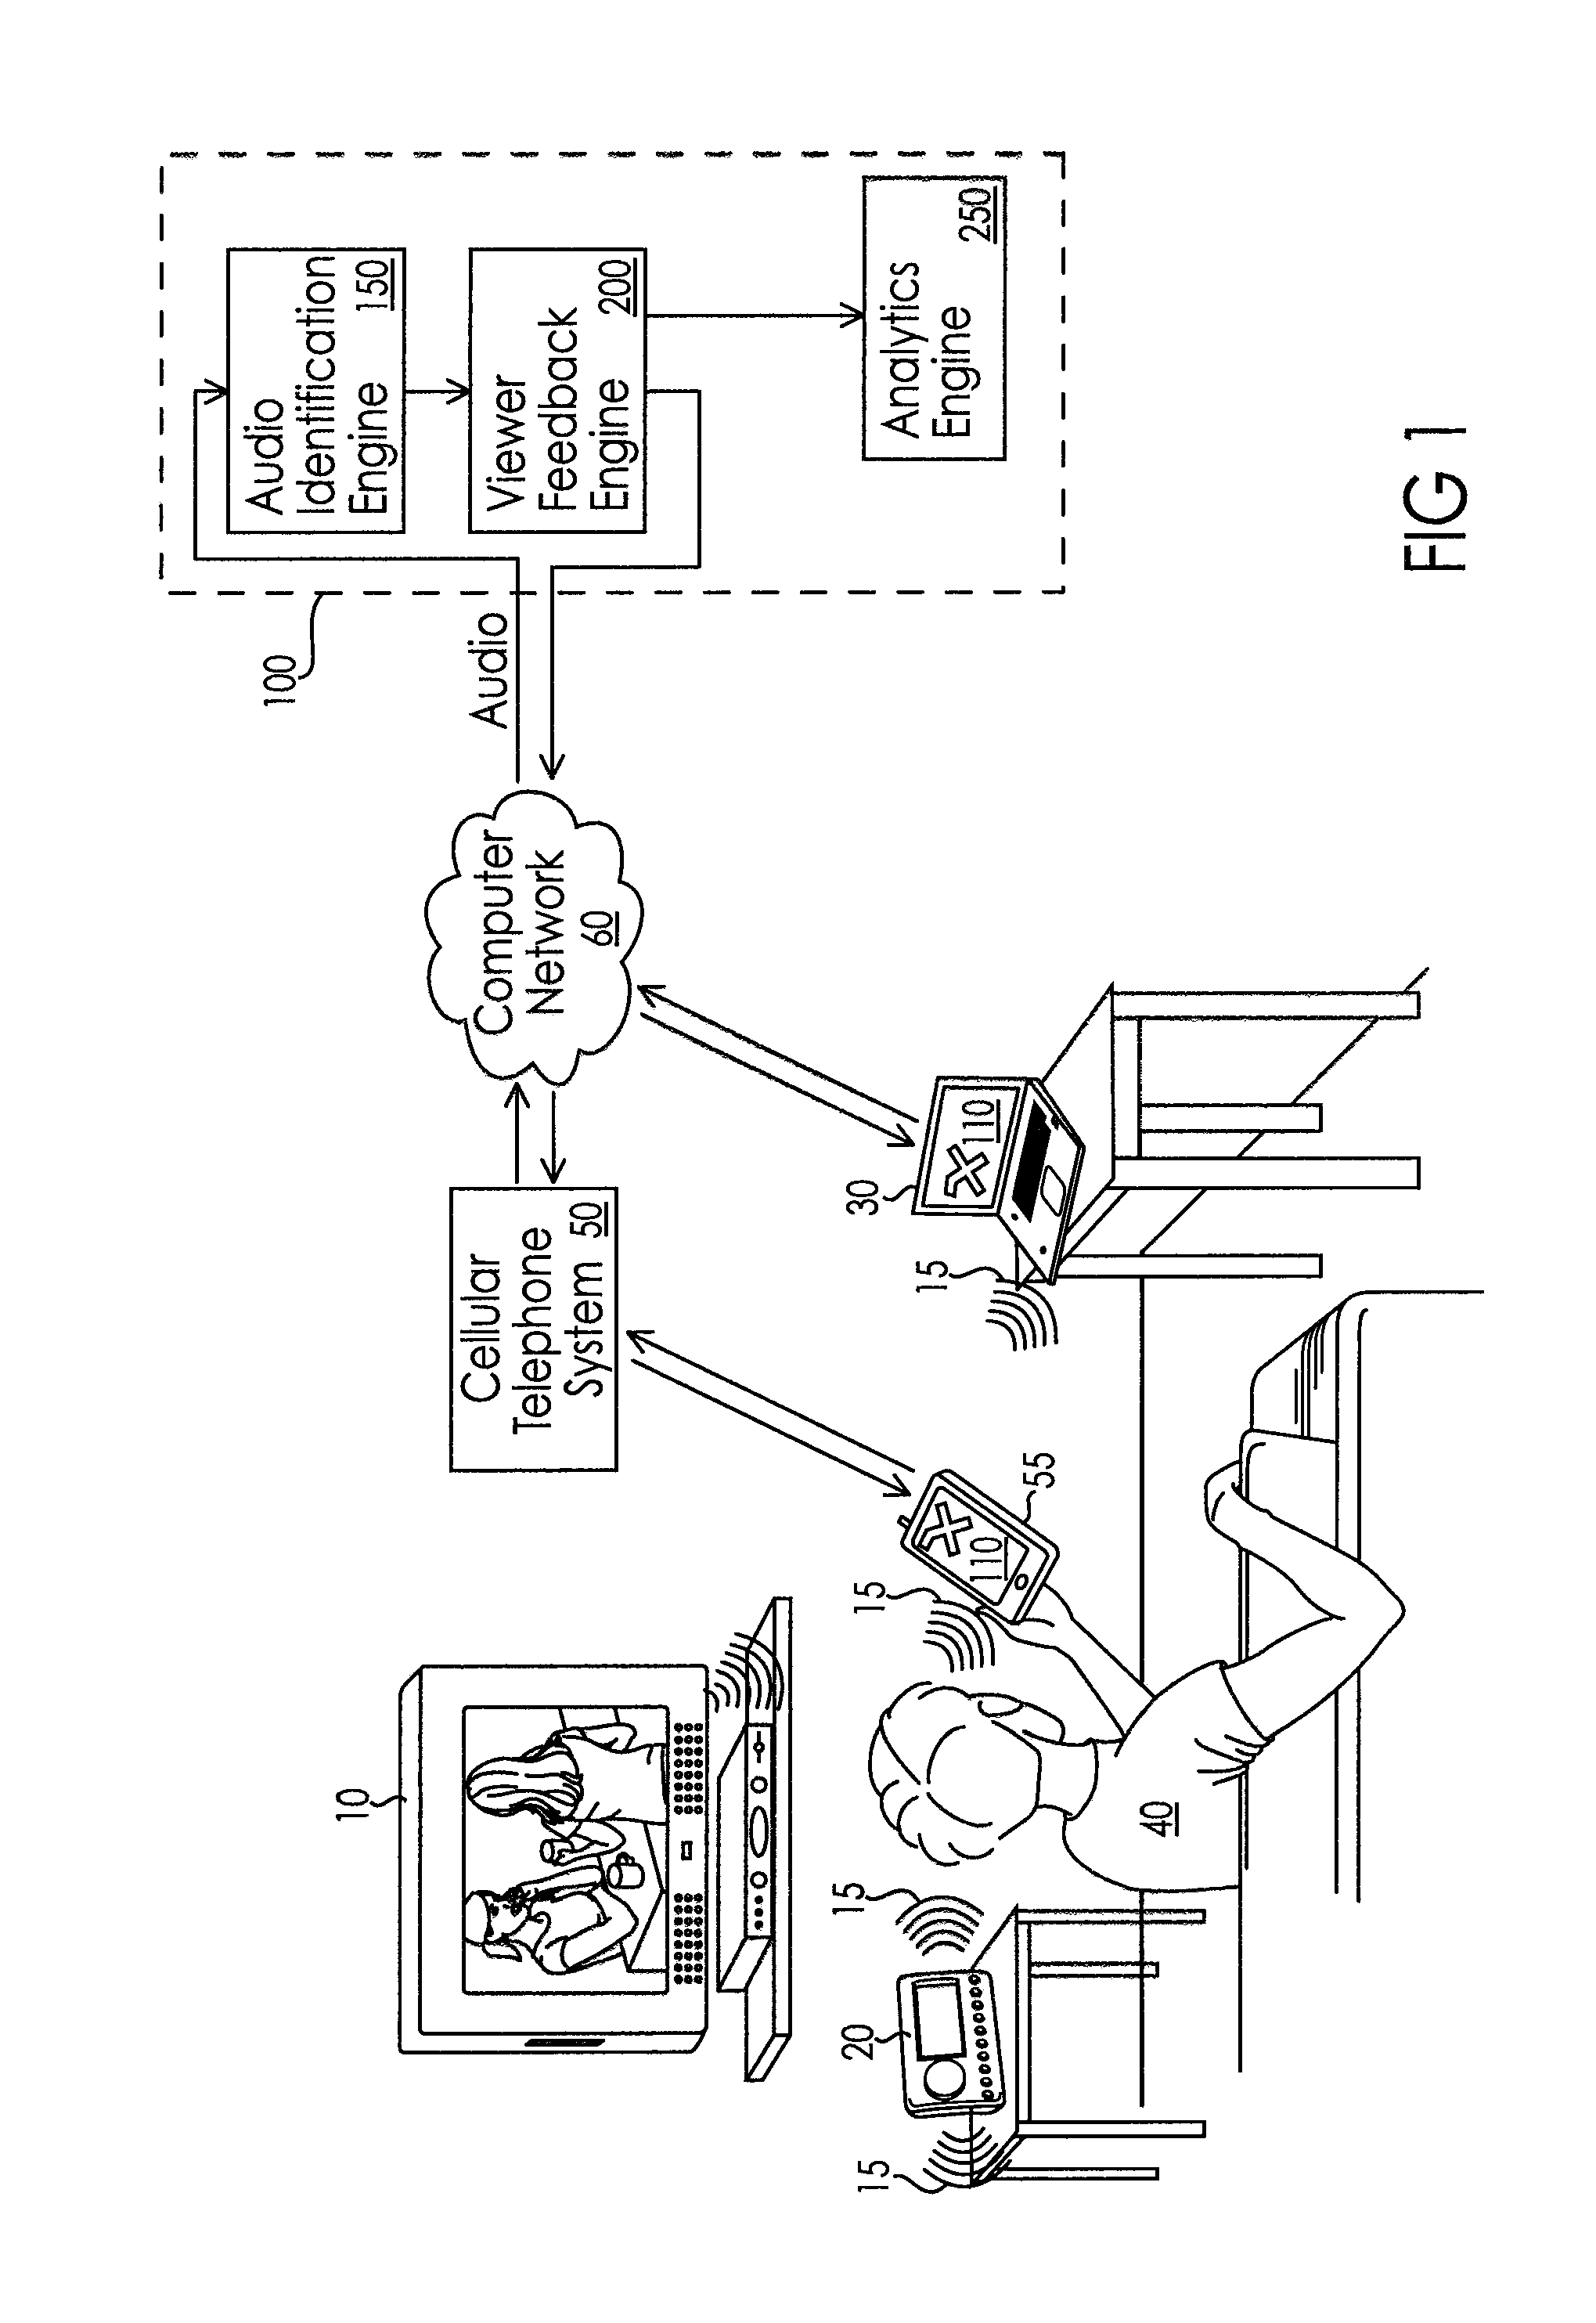 System and method for tracking and rewarding media and entertainment usage including substantially real time rewards